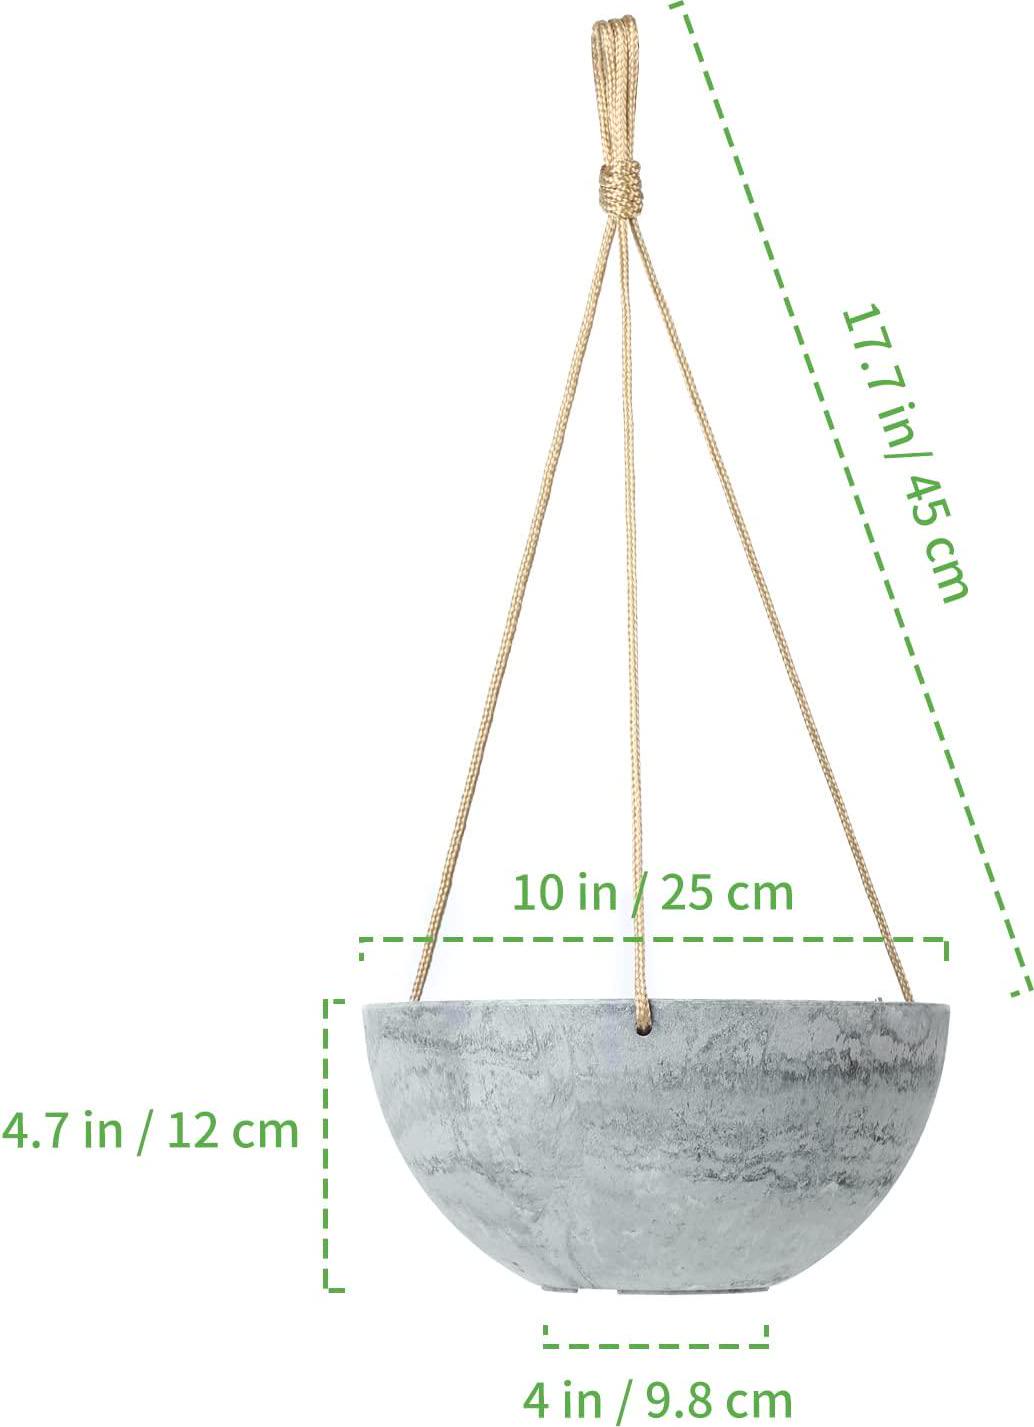 HECTOLIFE 2-Pack 10 Inch Hanging Planter Indoor Outdoor Planter Pot Plant Containers with Drainage Hole, Plant Pot for Hanging Plants,Hanging Flower Pot (Grey)